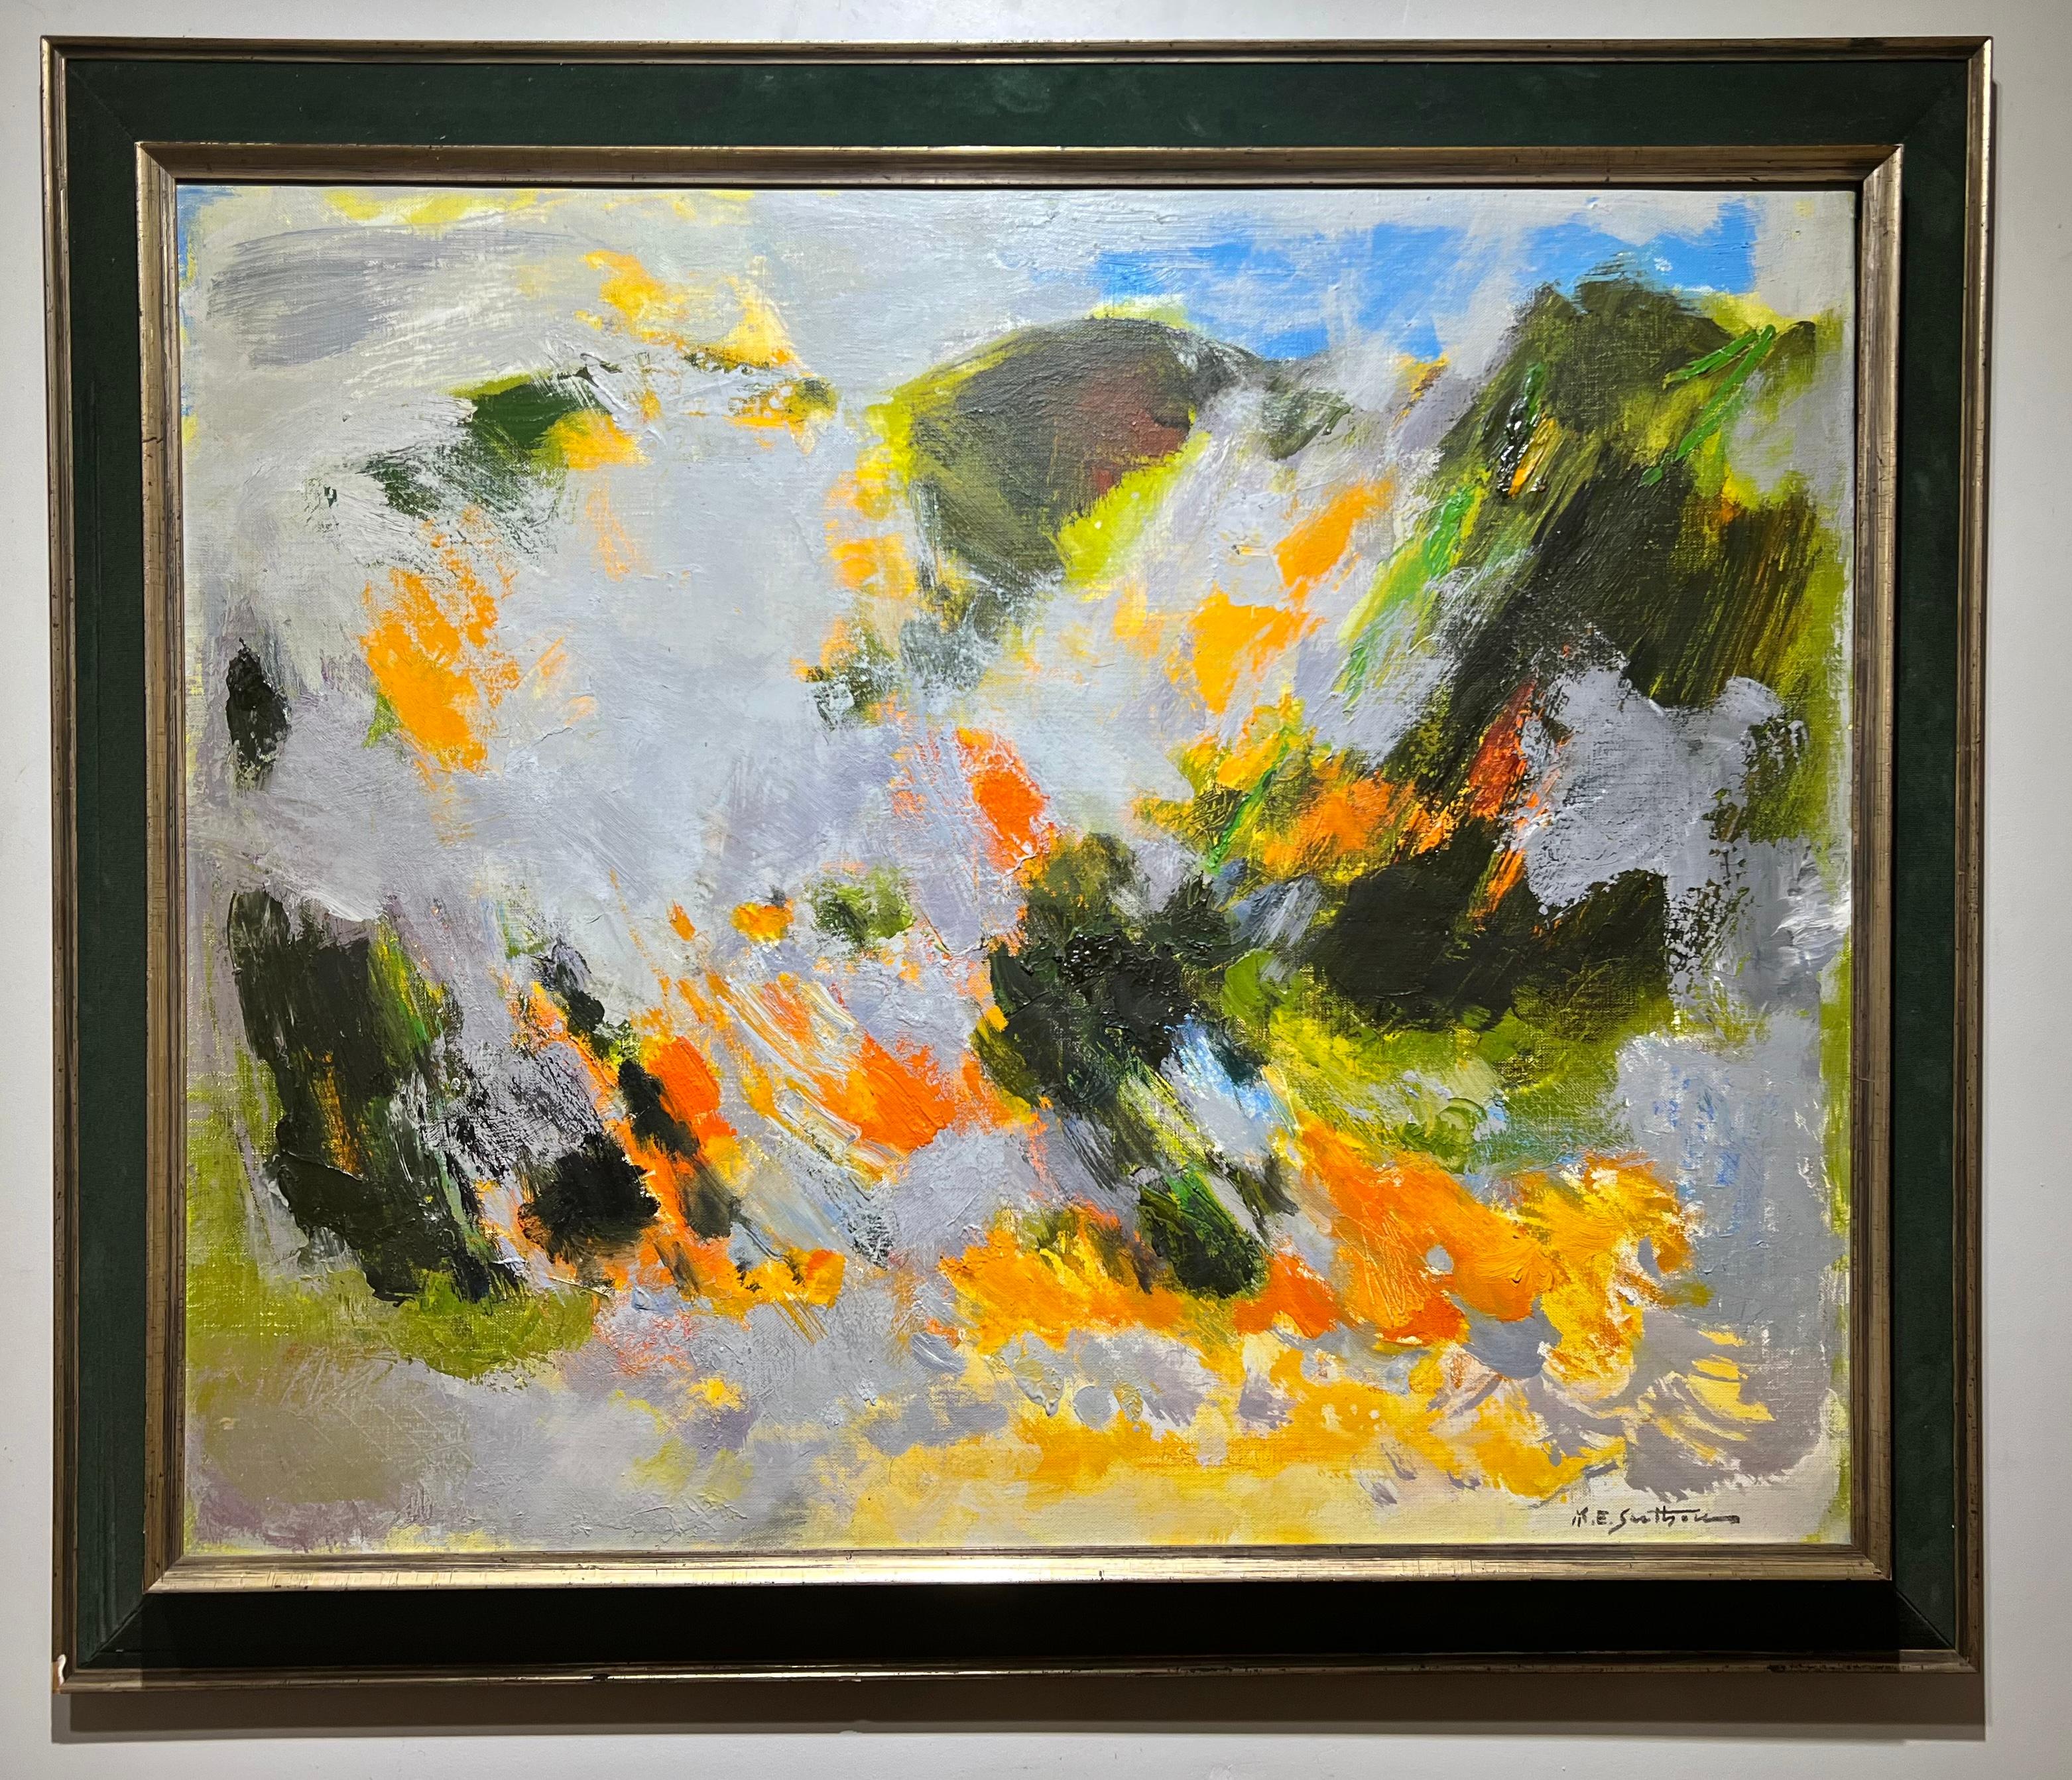 1966 French Abstract Expressionist COLORFUL painting “Feu de Marquis” - Painting by Maurice Élie Sarthou